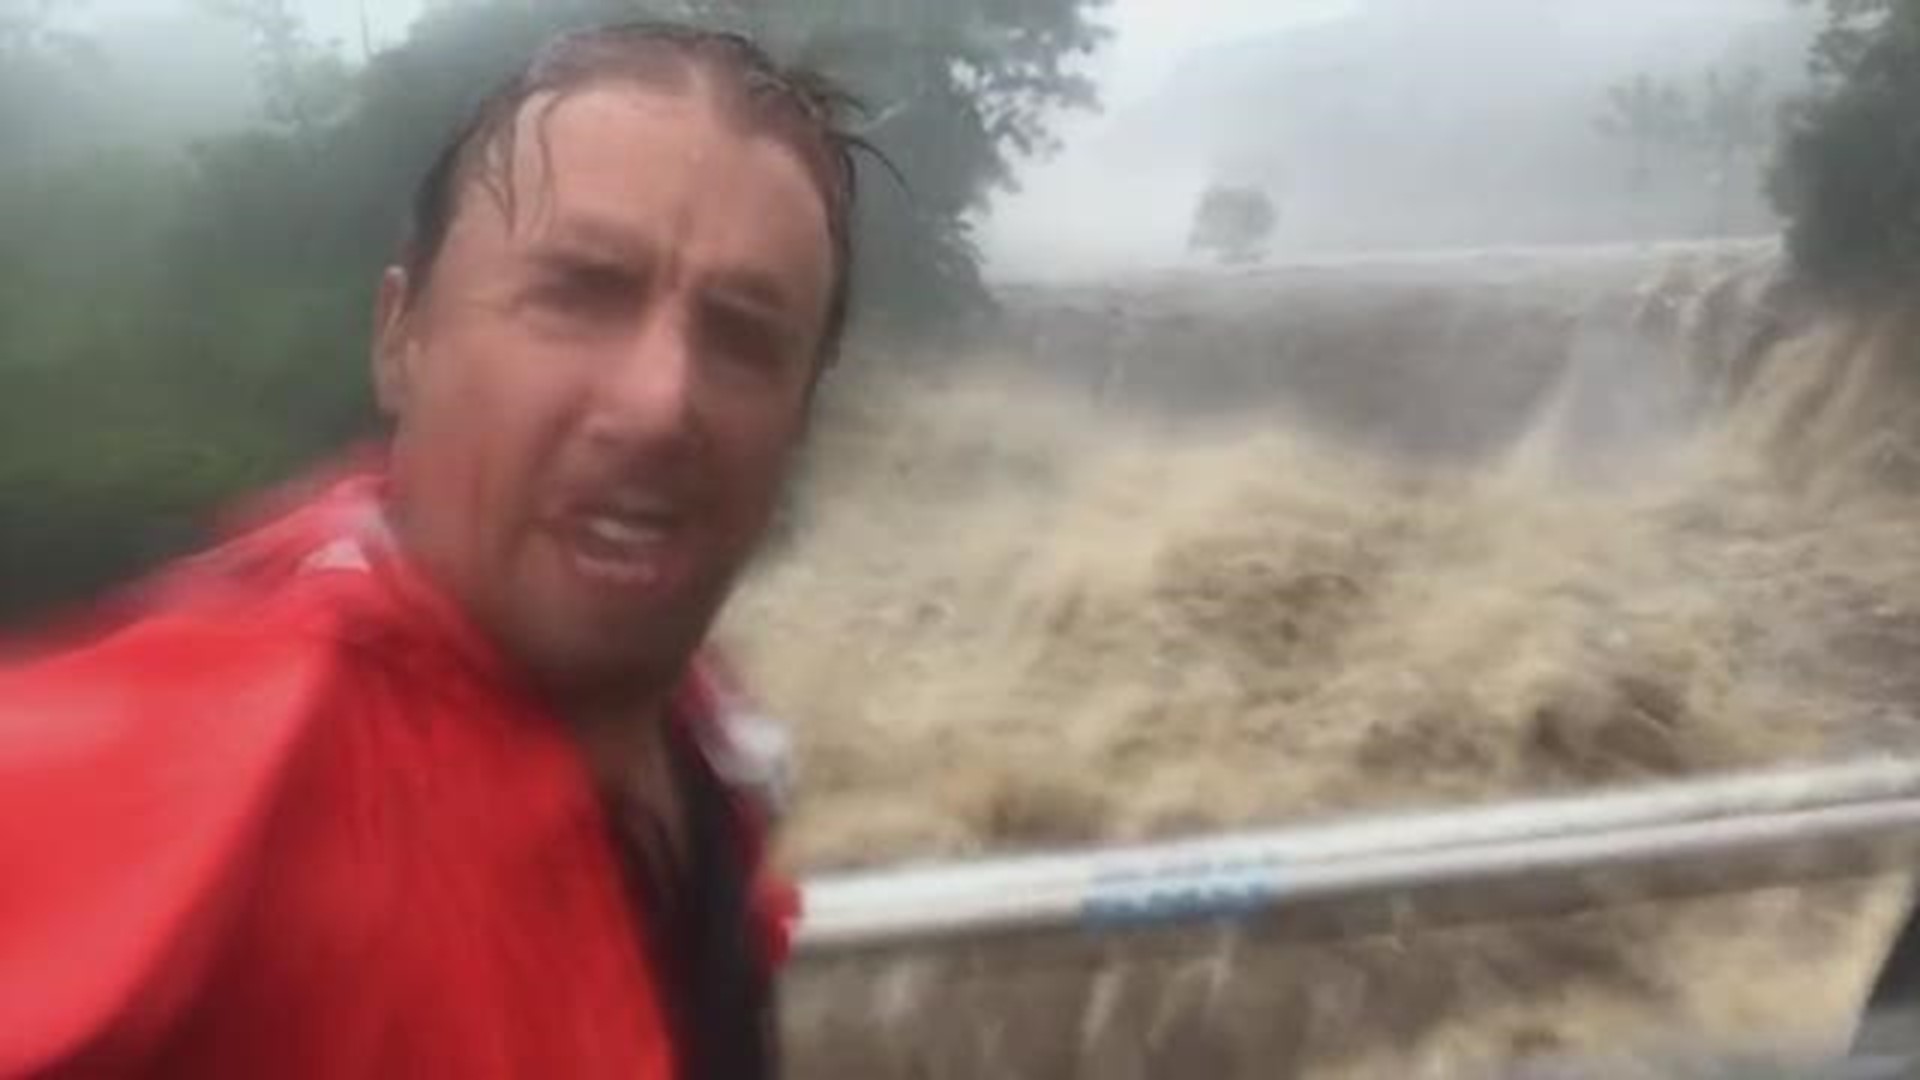 As Hurricane Lane bears down on Hawaii, AccuWeather storm chaser Reed Timmer reports from Hilo which has seen more than 17 inches of rain. Waiakea is reporting 31 inches. The downpours have triggered major flooding and landslides across Hawaii.